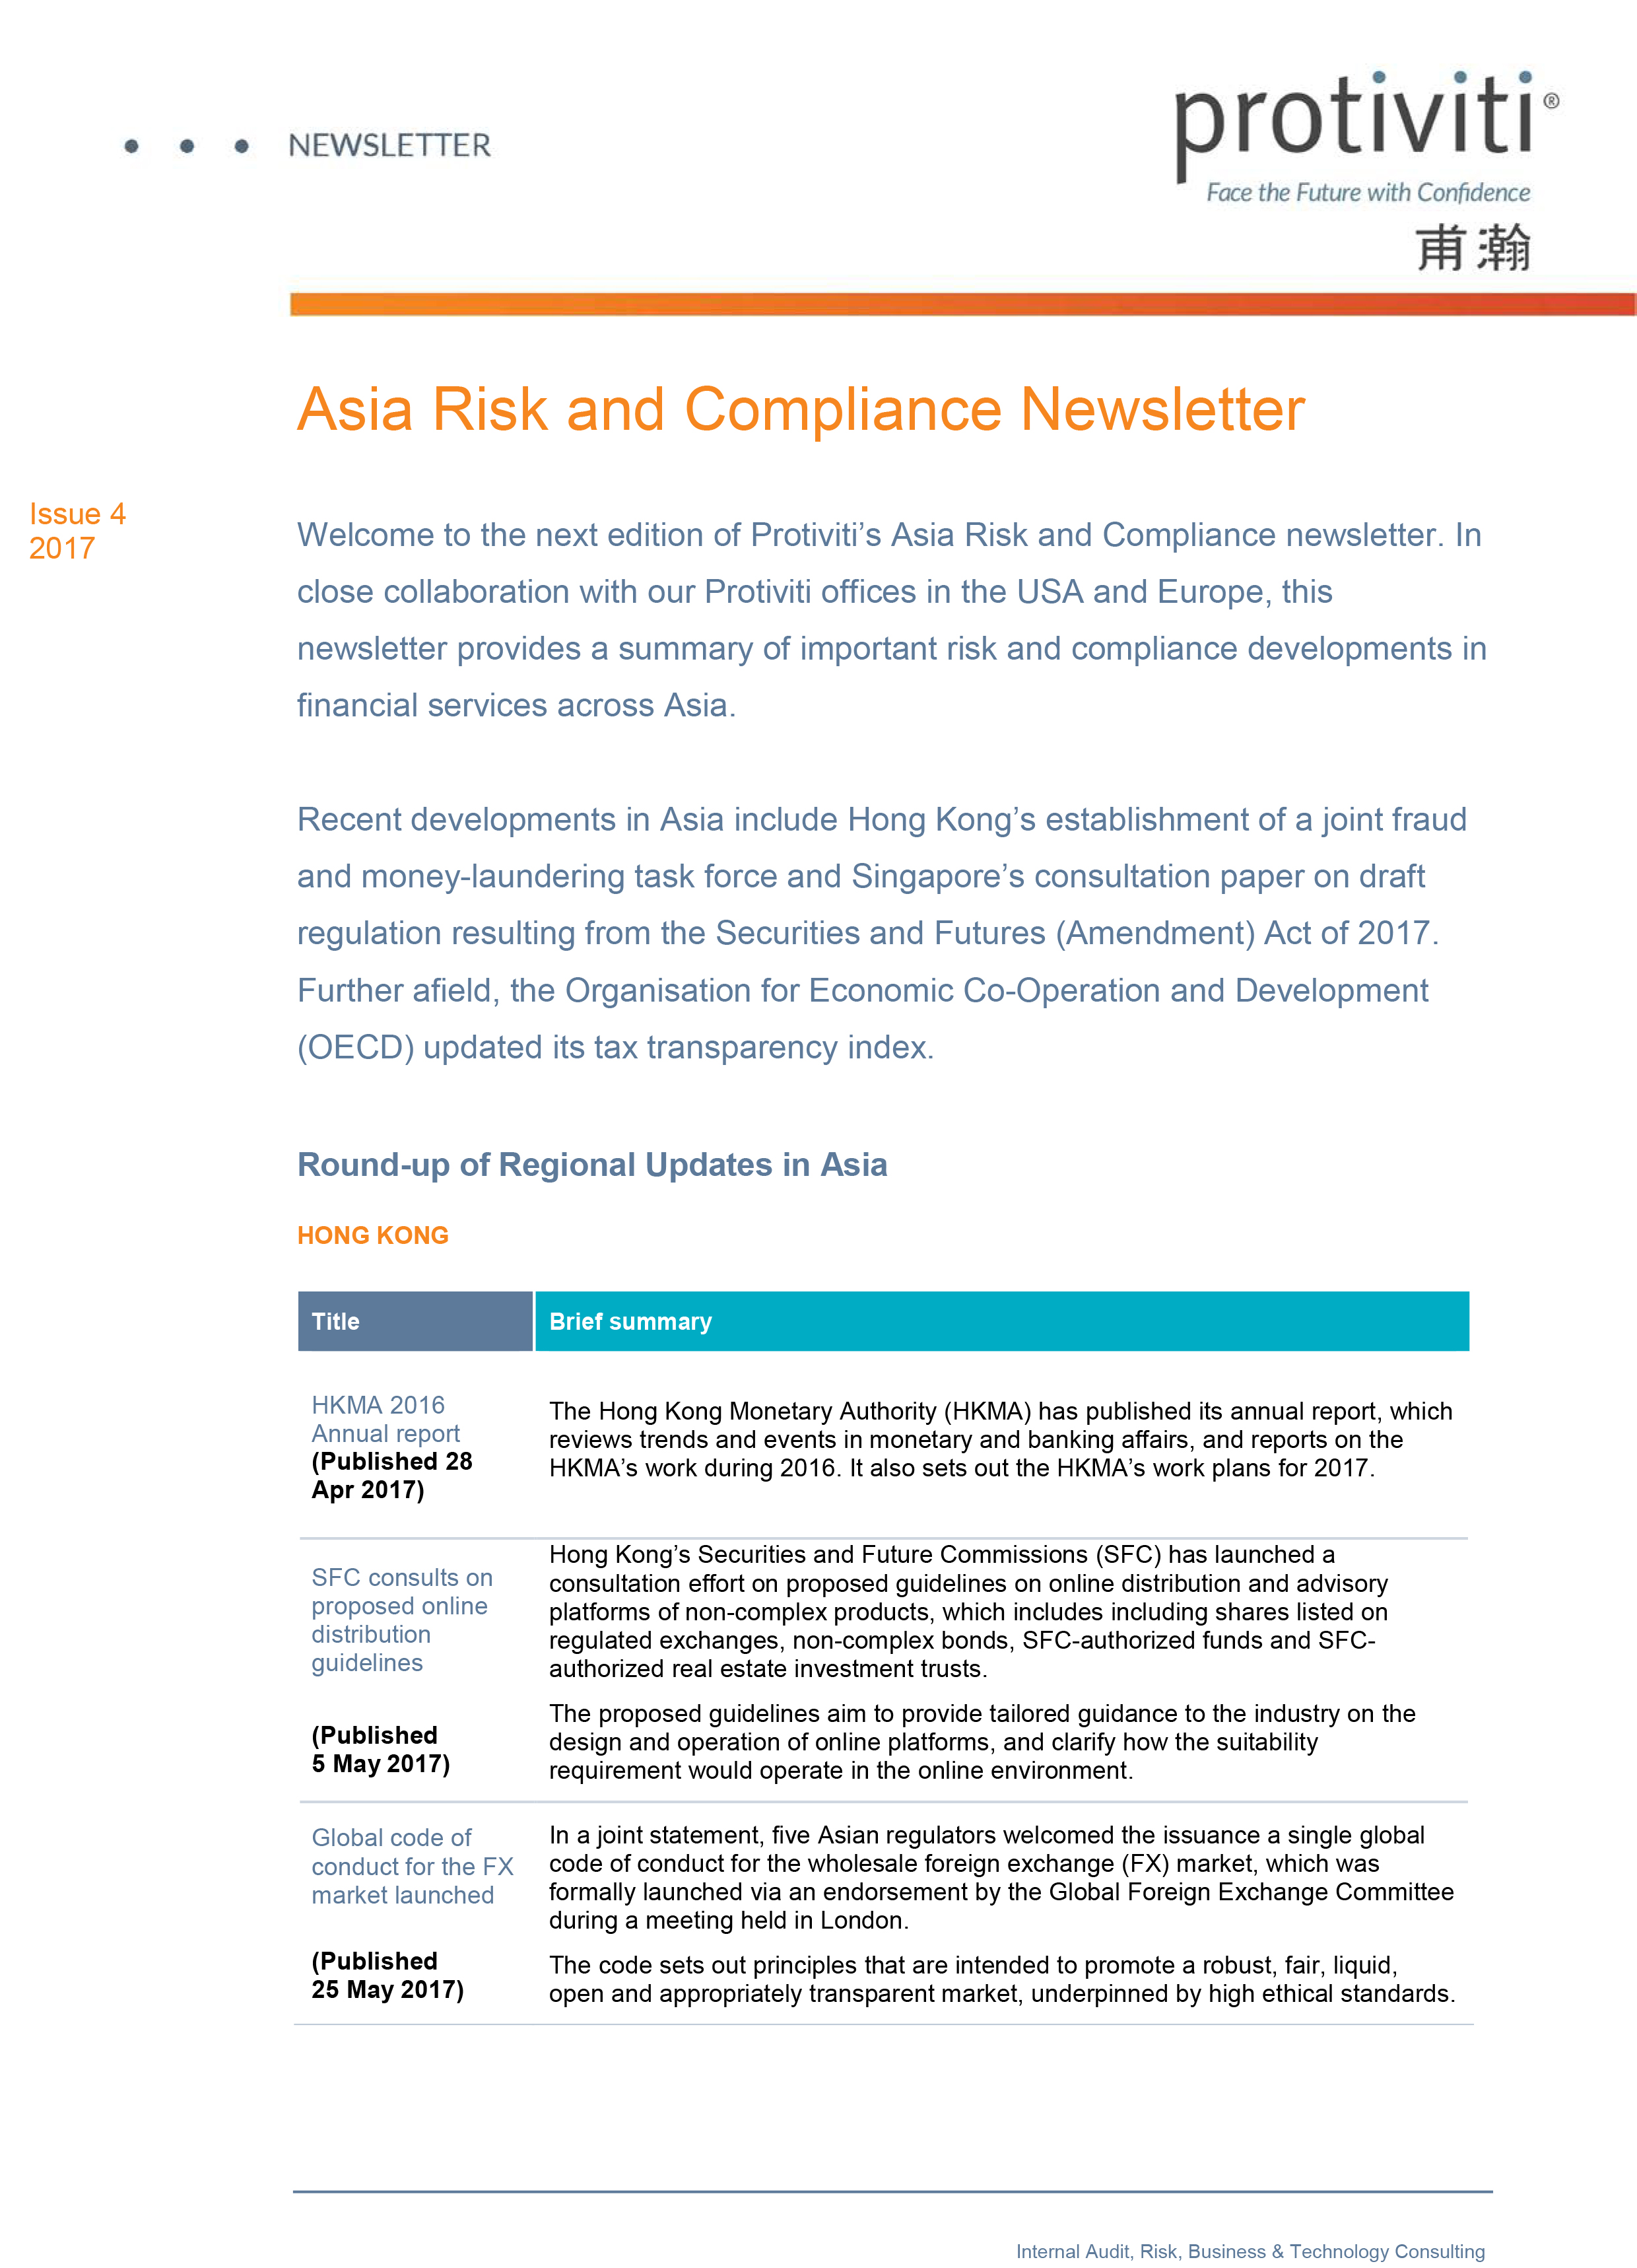 Screenshot of the first page of Asia Risk and Compliance Newsletter